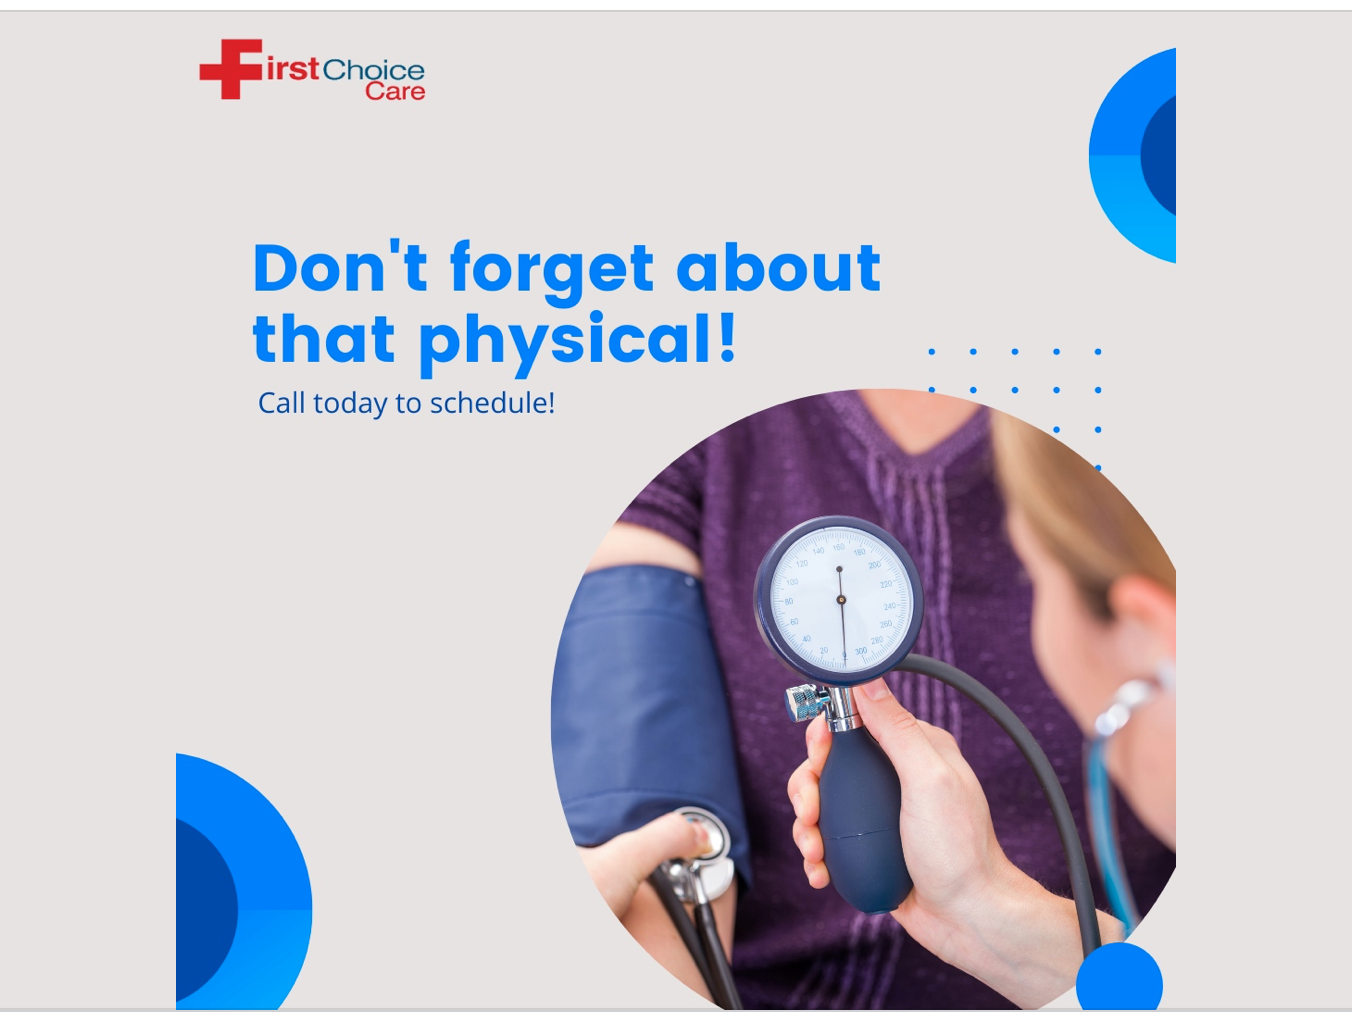 Have you scheduled your annual physical yet? If not, give First Choice Care a call! Annual physicals are an important step in preventative care, and to keep you in tip-top shape!